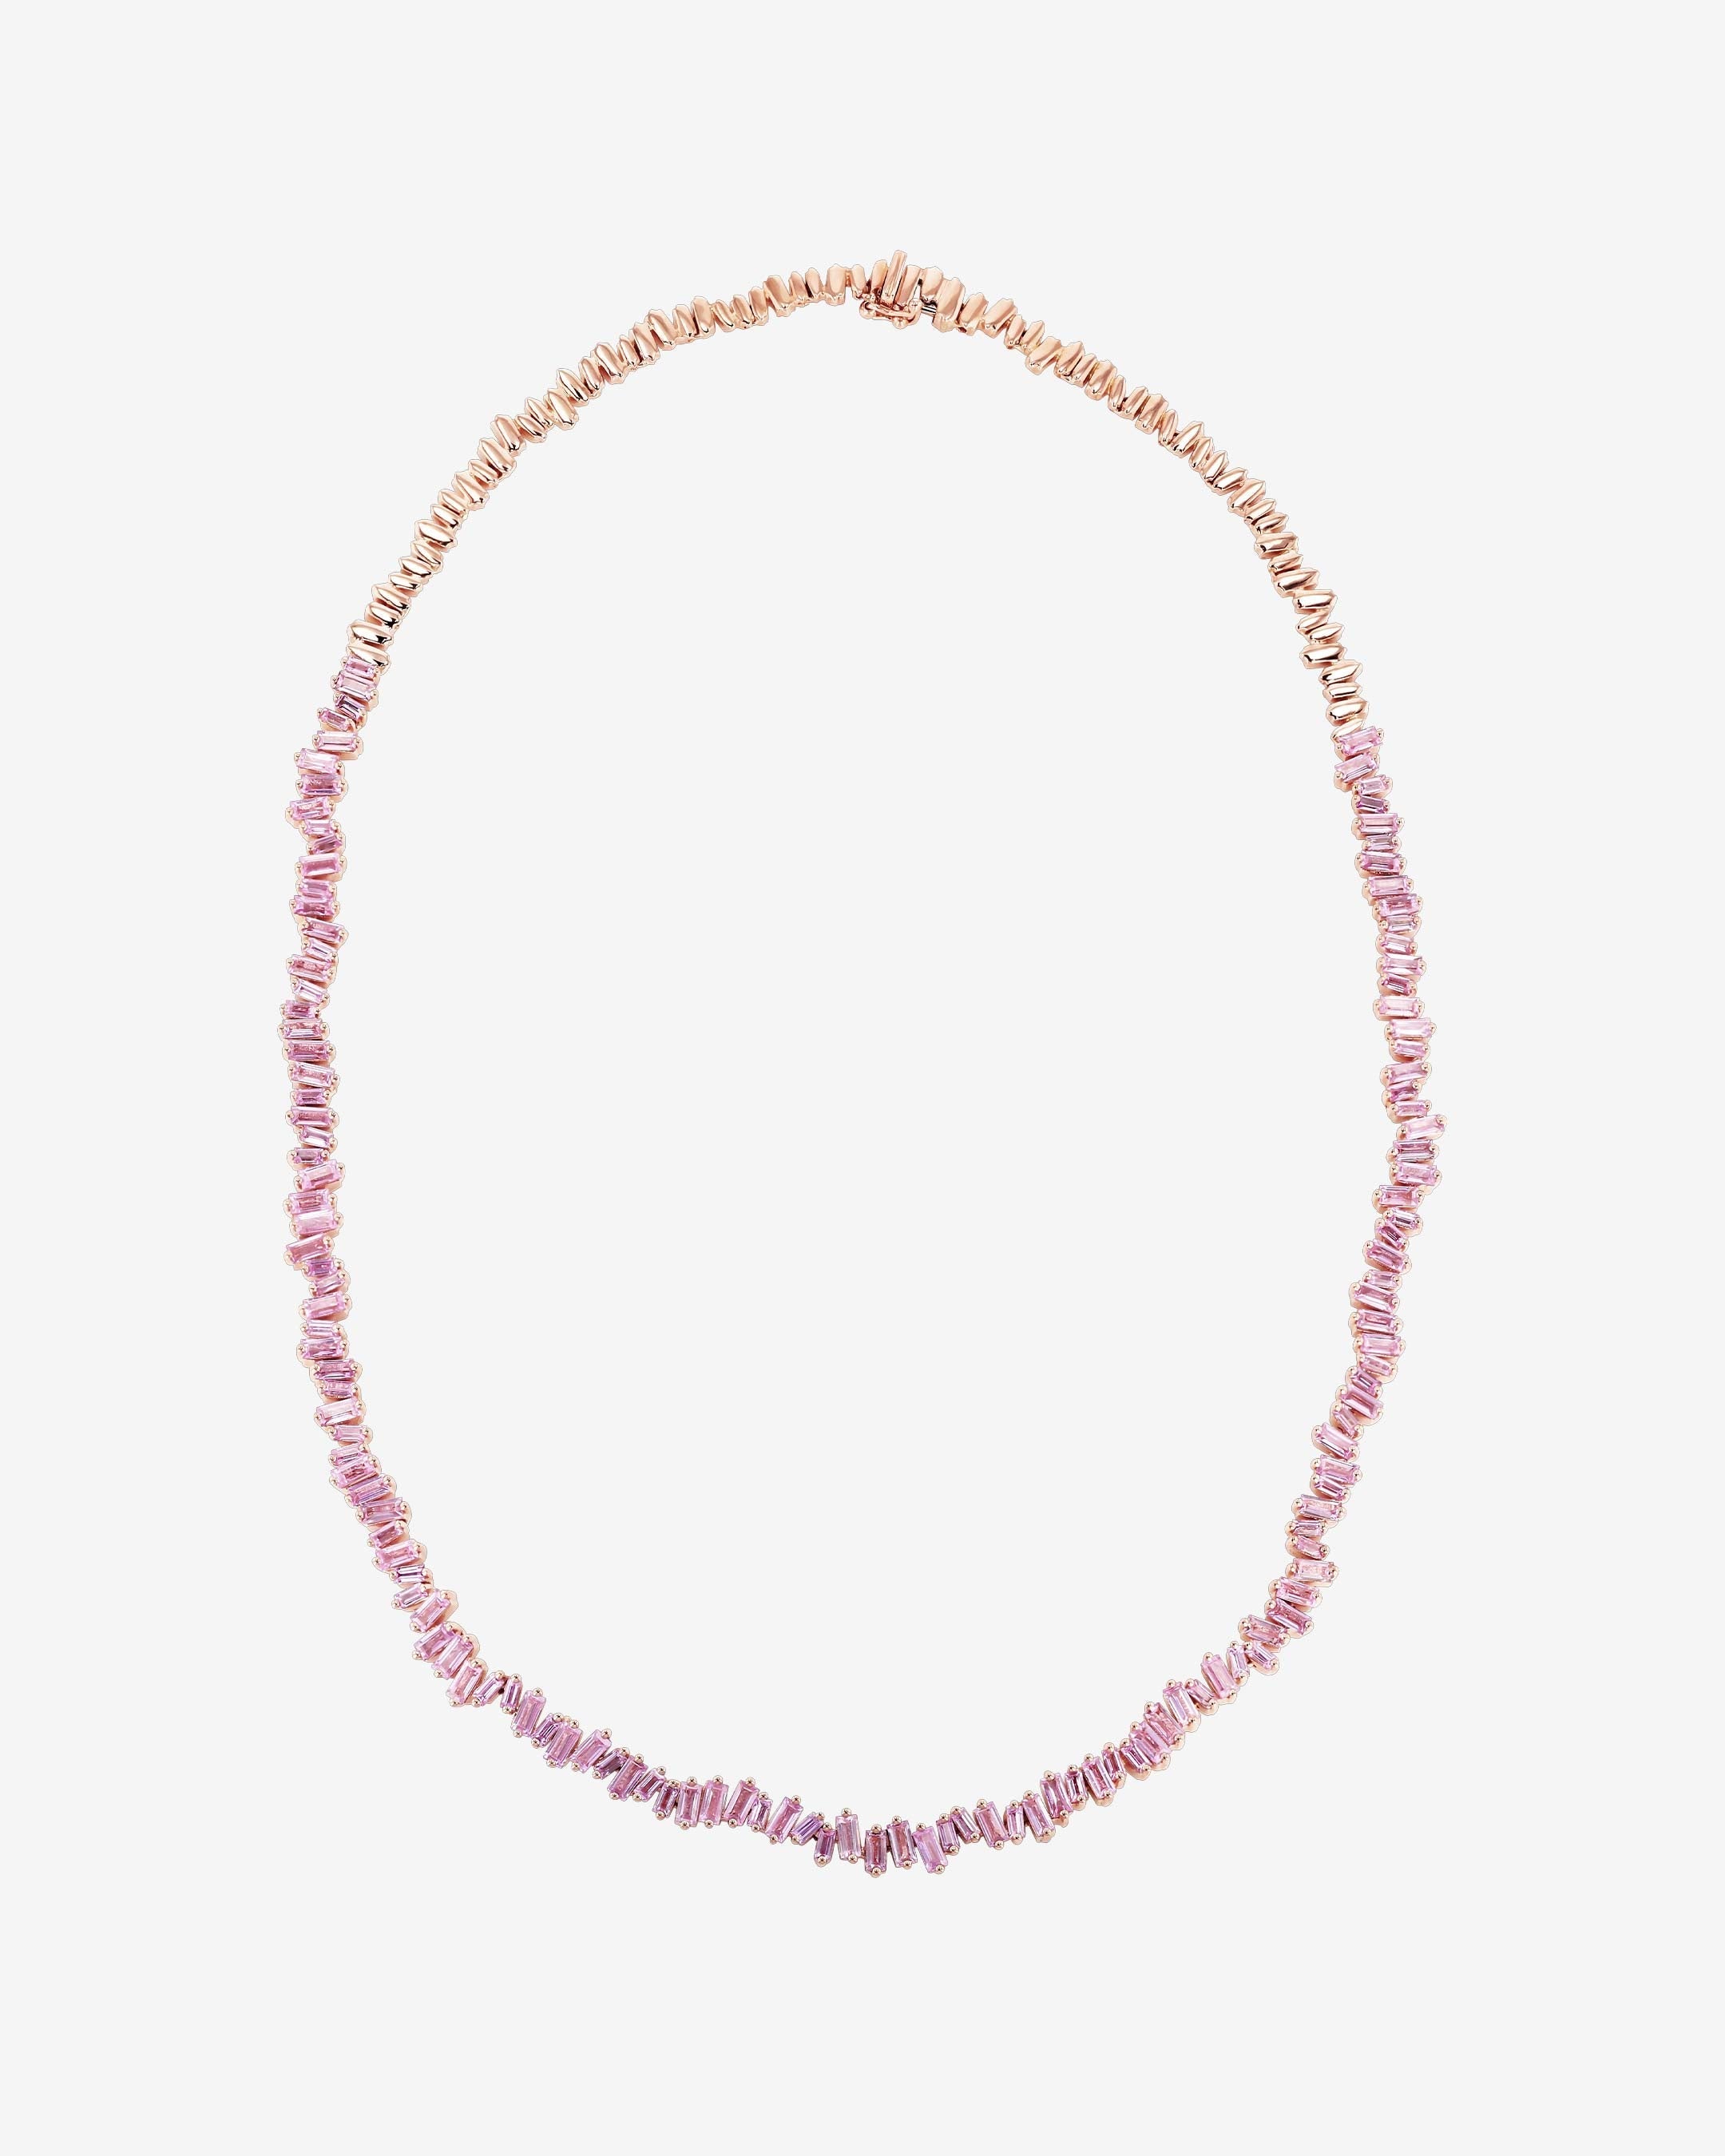 Suzanne Kalan Bold Pink Sapphire Tennis Necklace in 18k rose gold